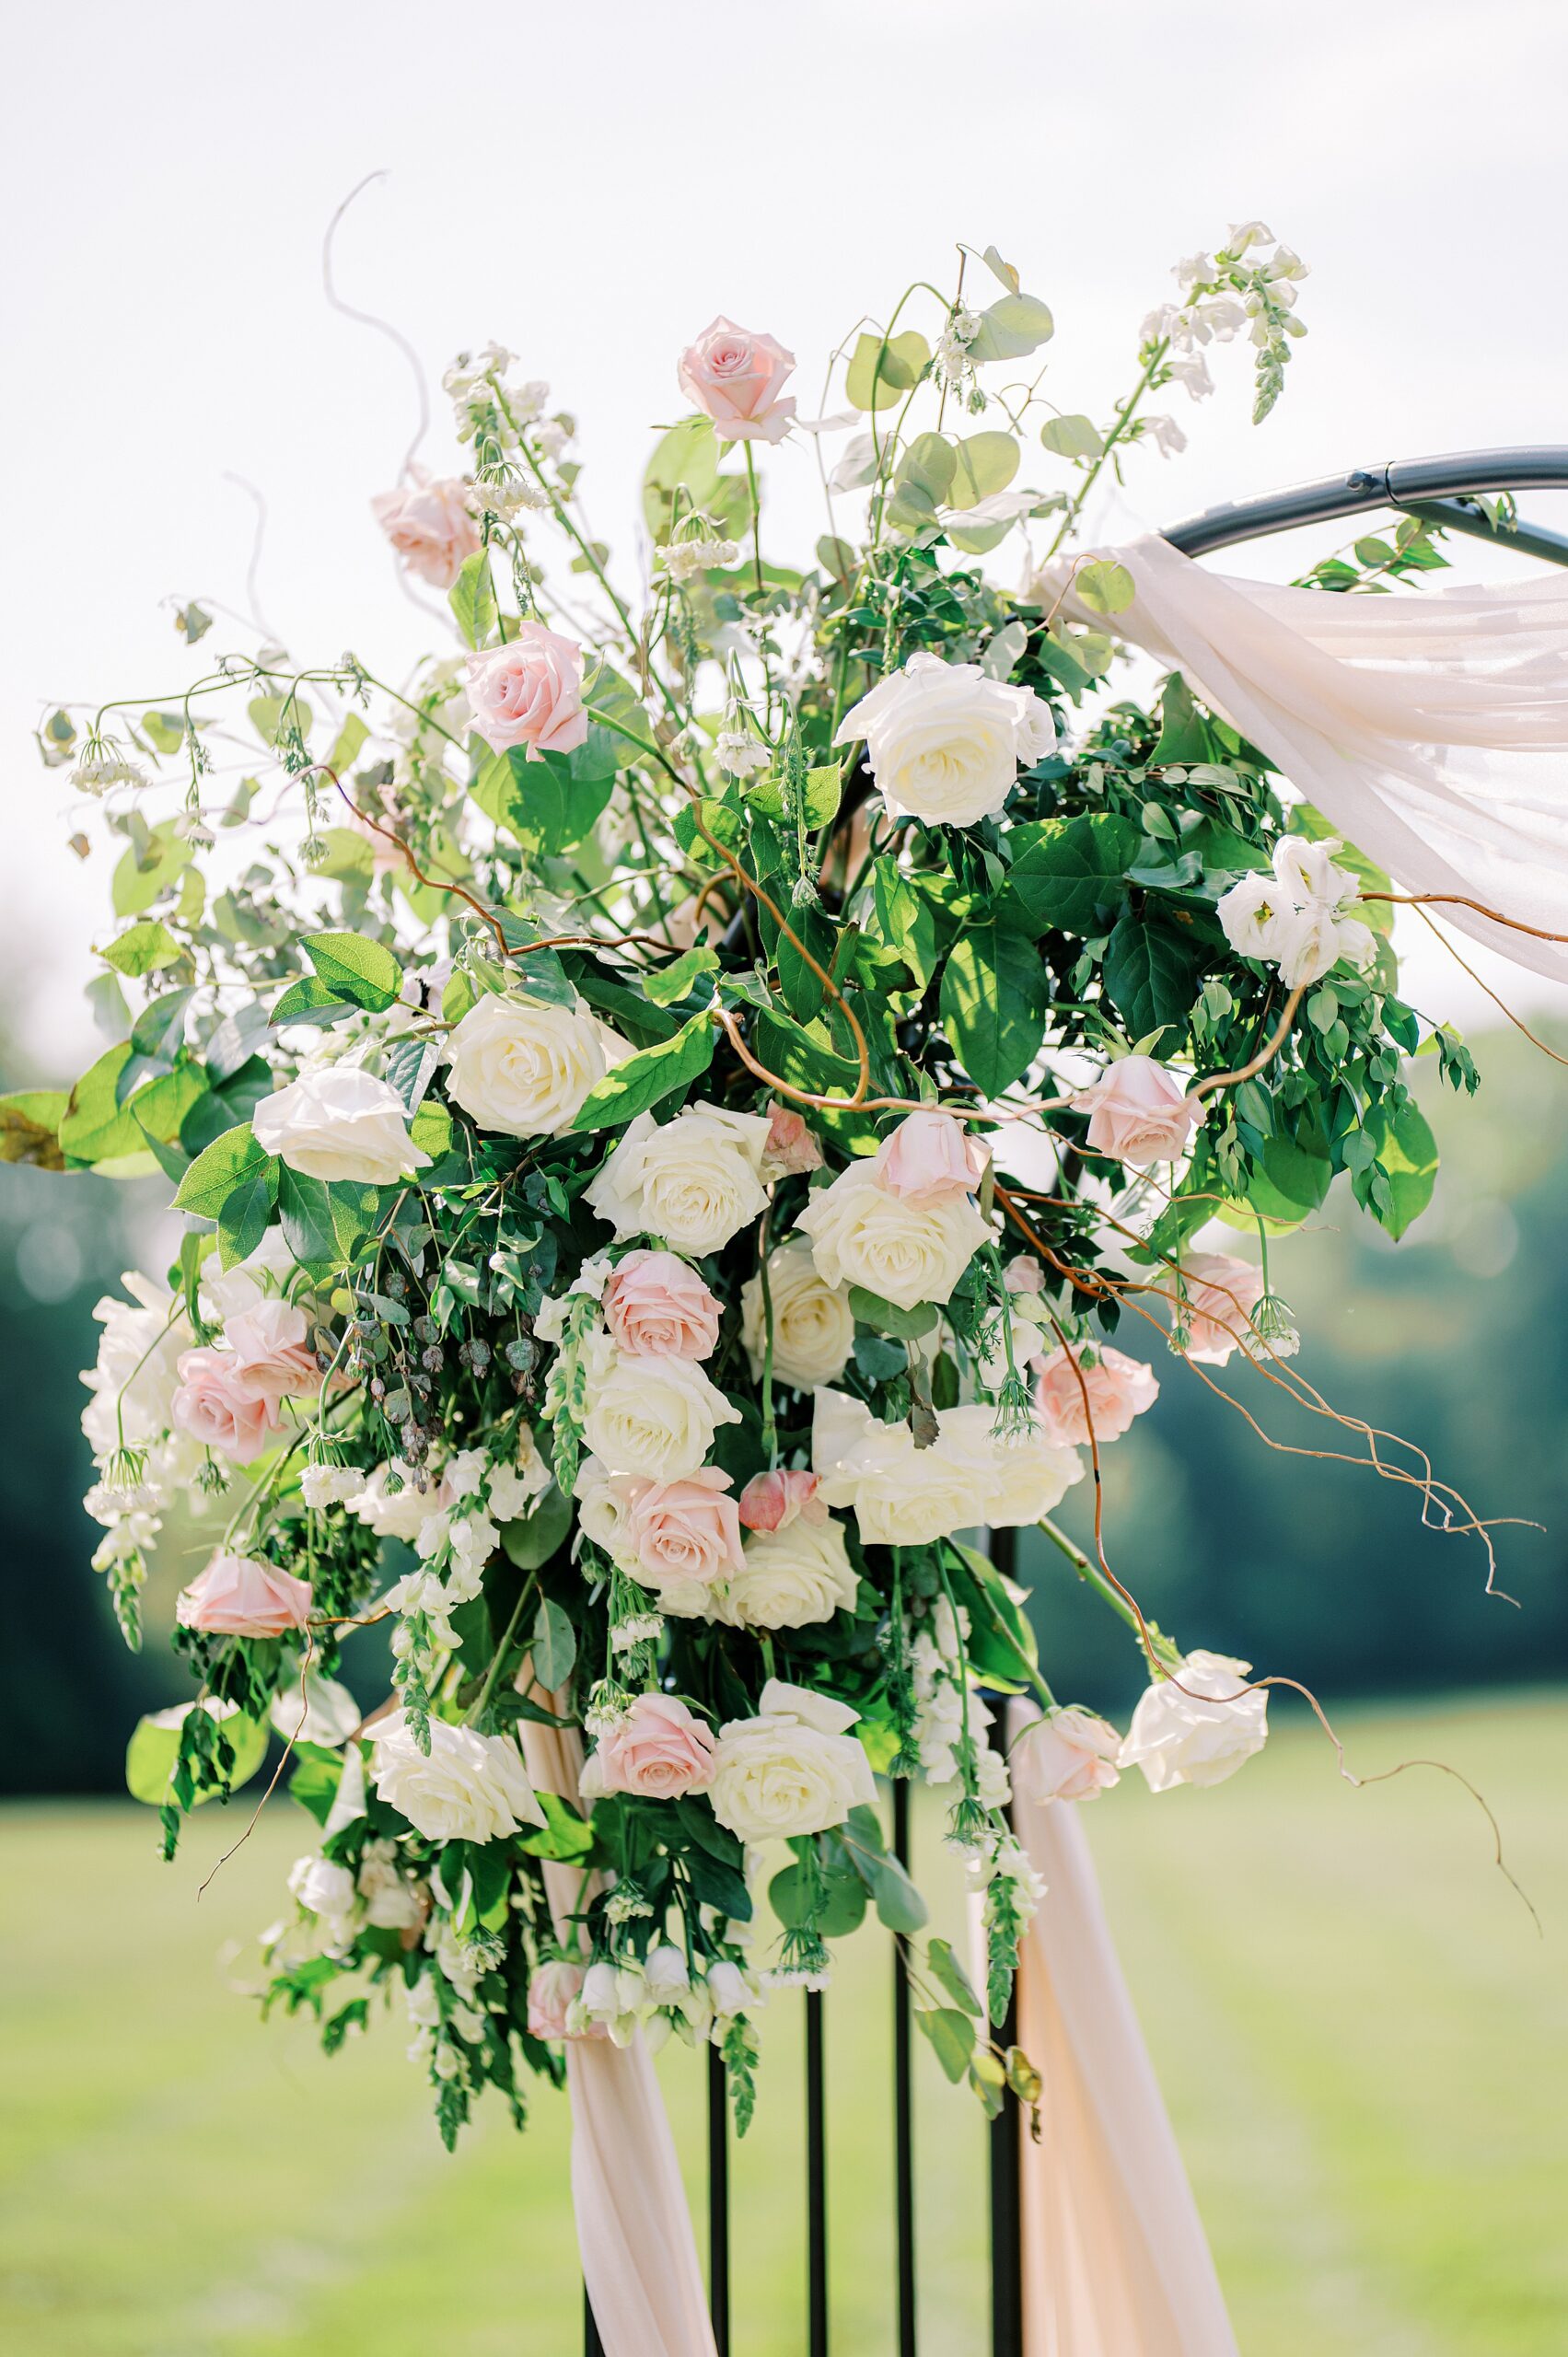 Details of a wedding ceremony floral decoration of white and pink roses